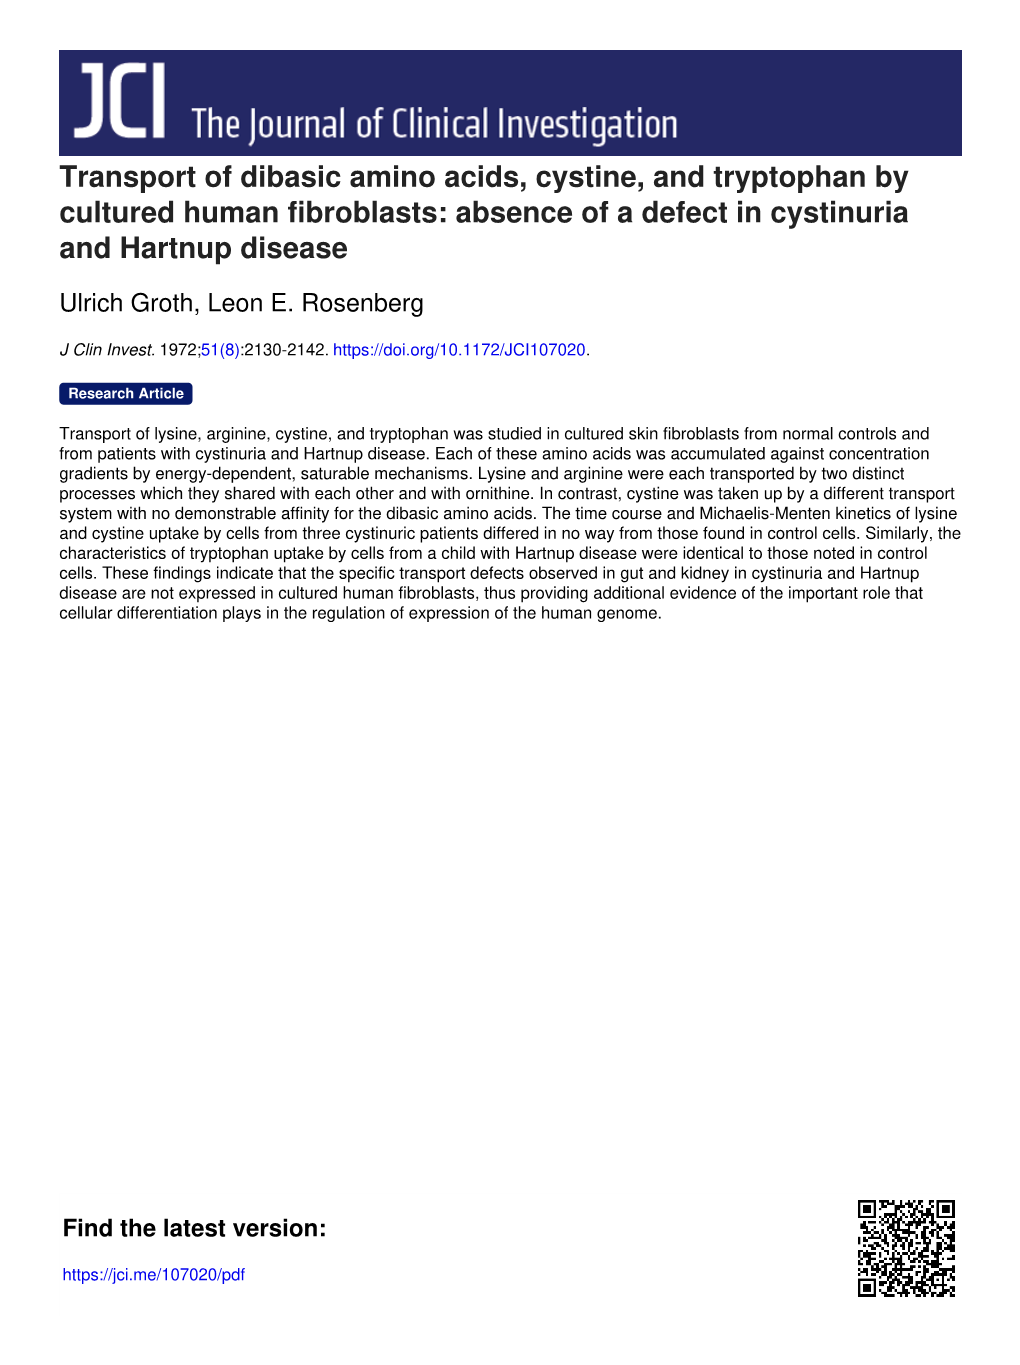 Transport of Dibasic Amino Acids, Cystine, and Tryptophan by Cultured Human Fibroblasts: Absence of a Defect in Cystinuria and Hartnup Disease